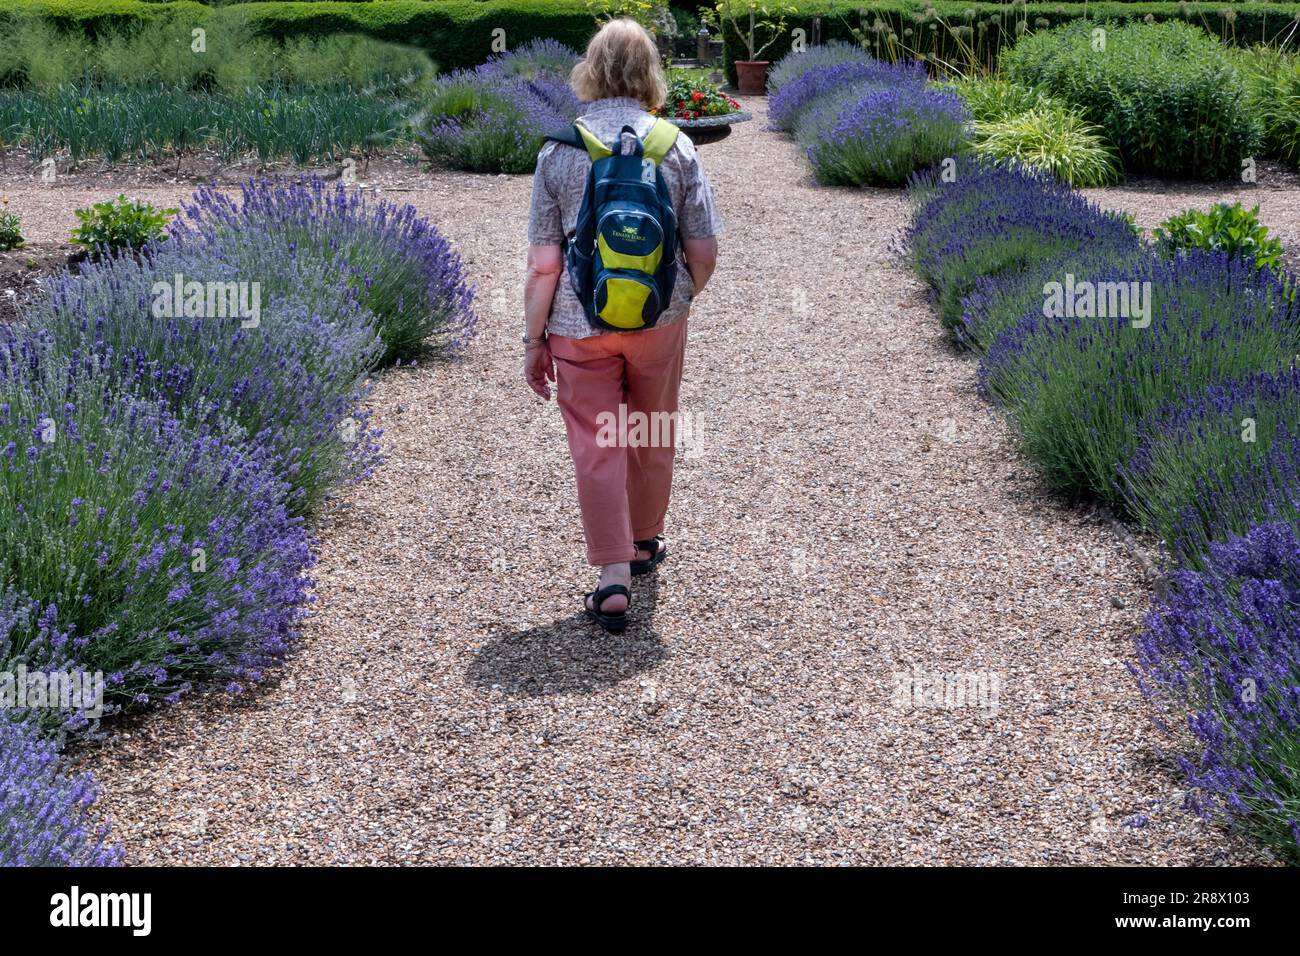 Lavender boarder in an English country garden in summer Stock Photo